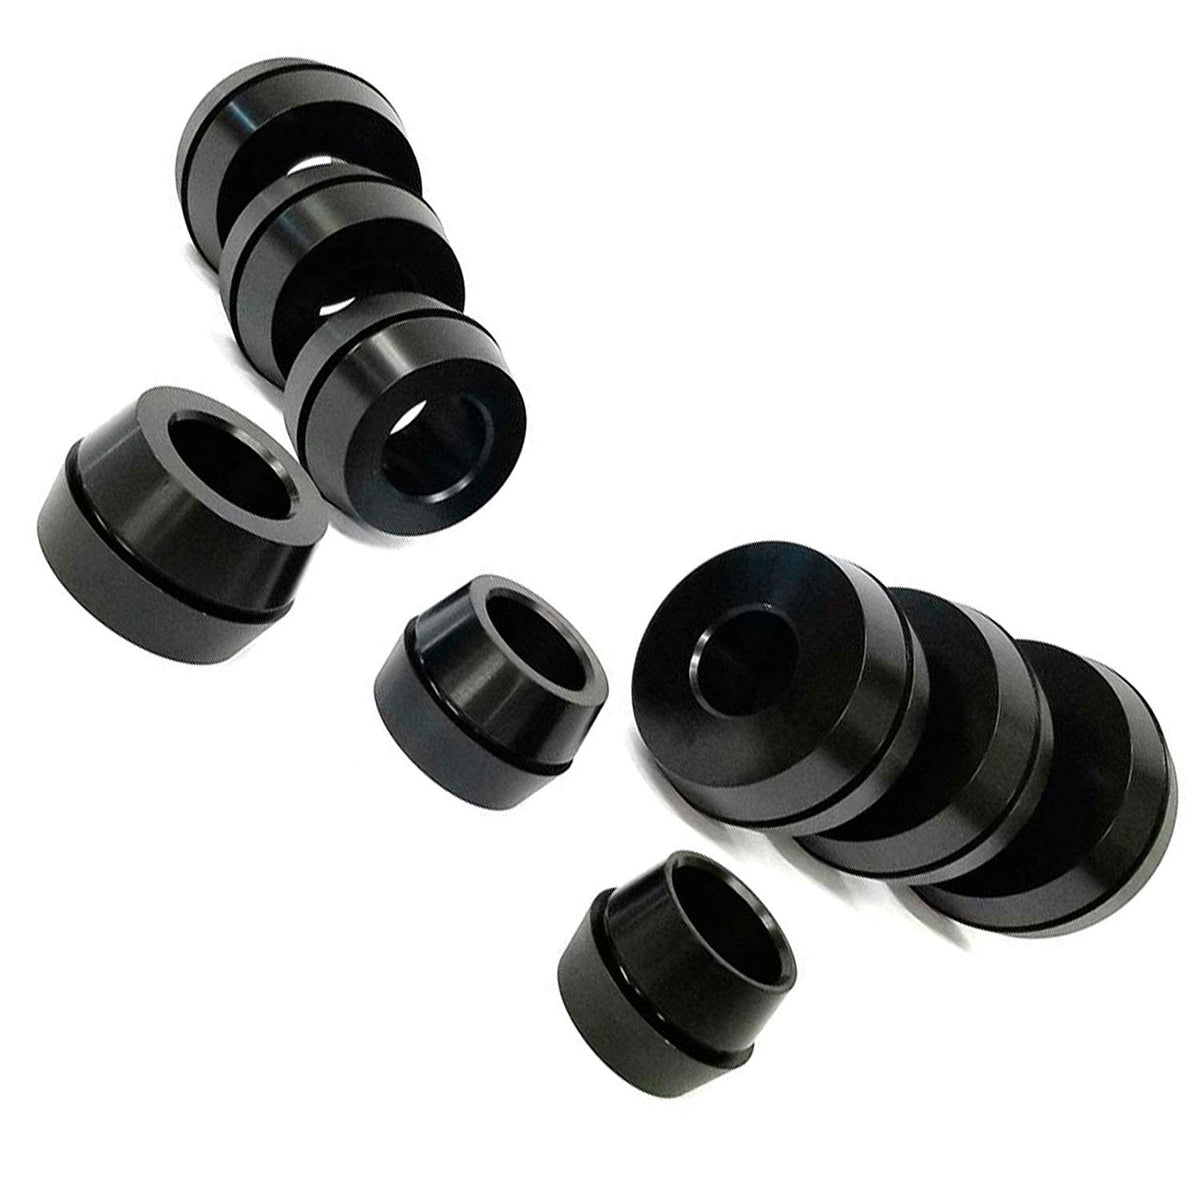 Haweka 9-Piece Double Sided Low Taper Collet Kit, 36mm